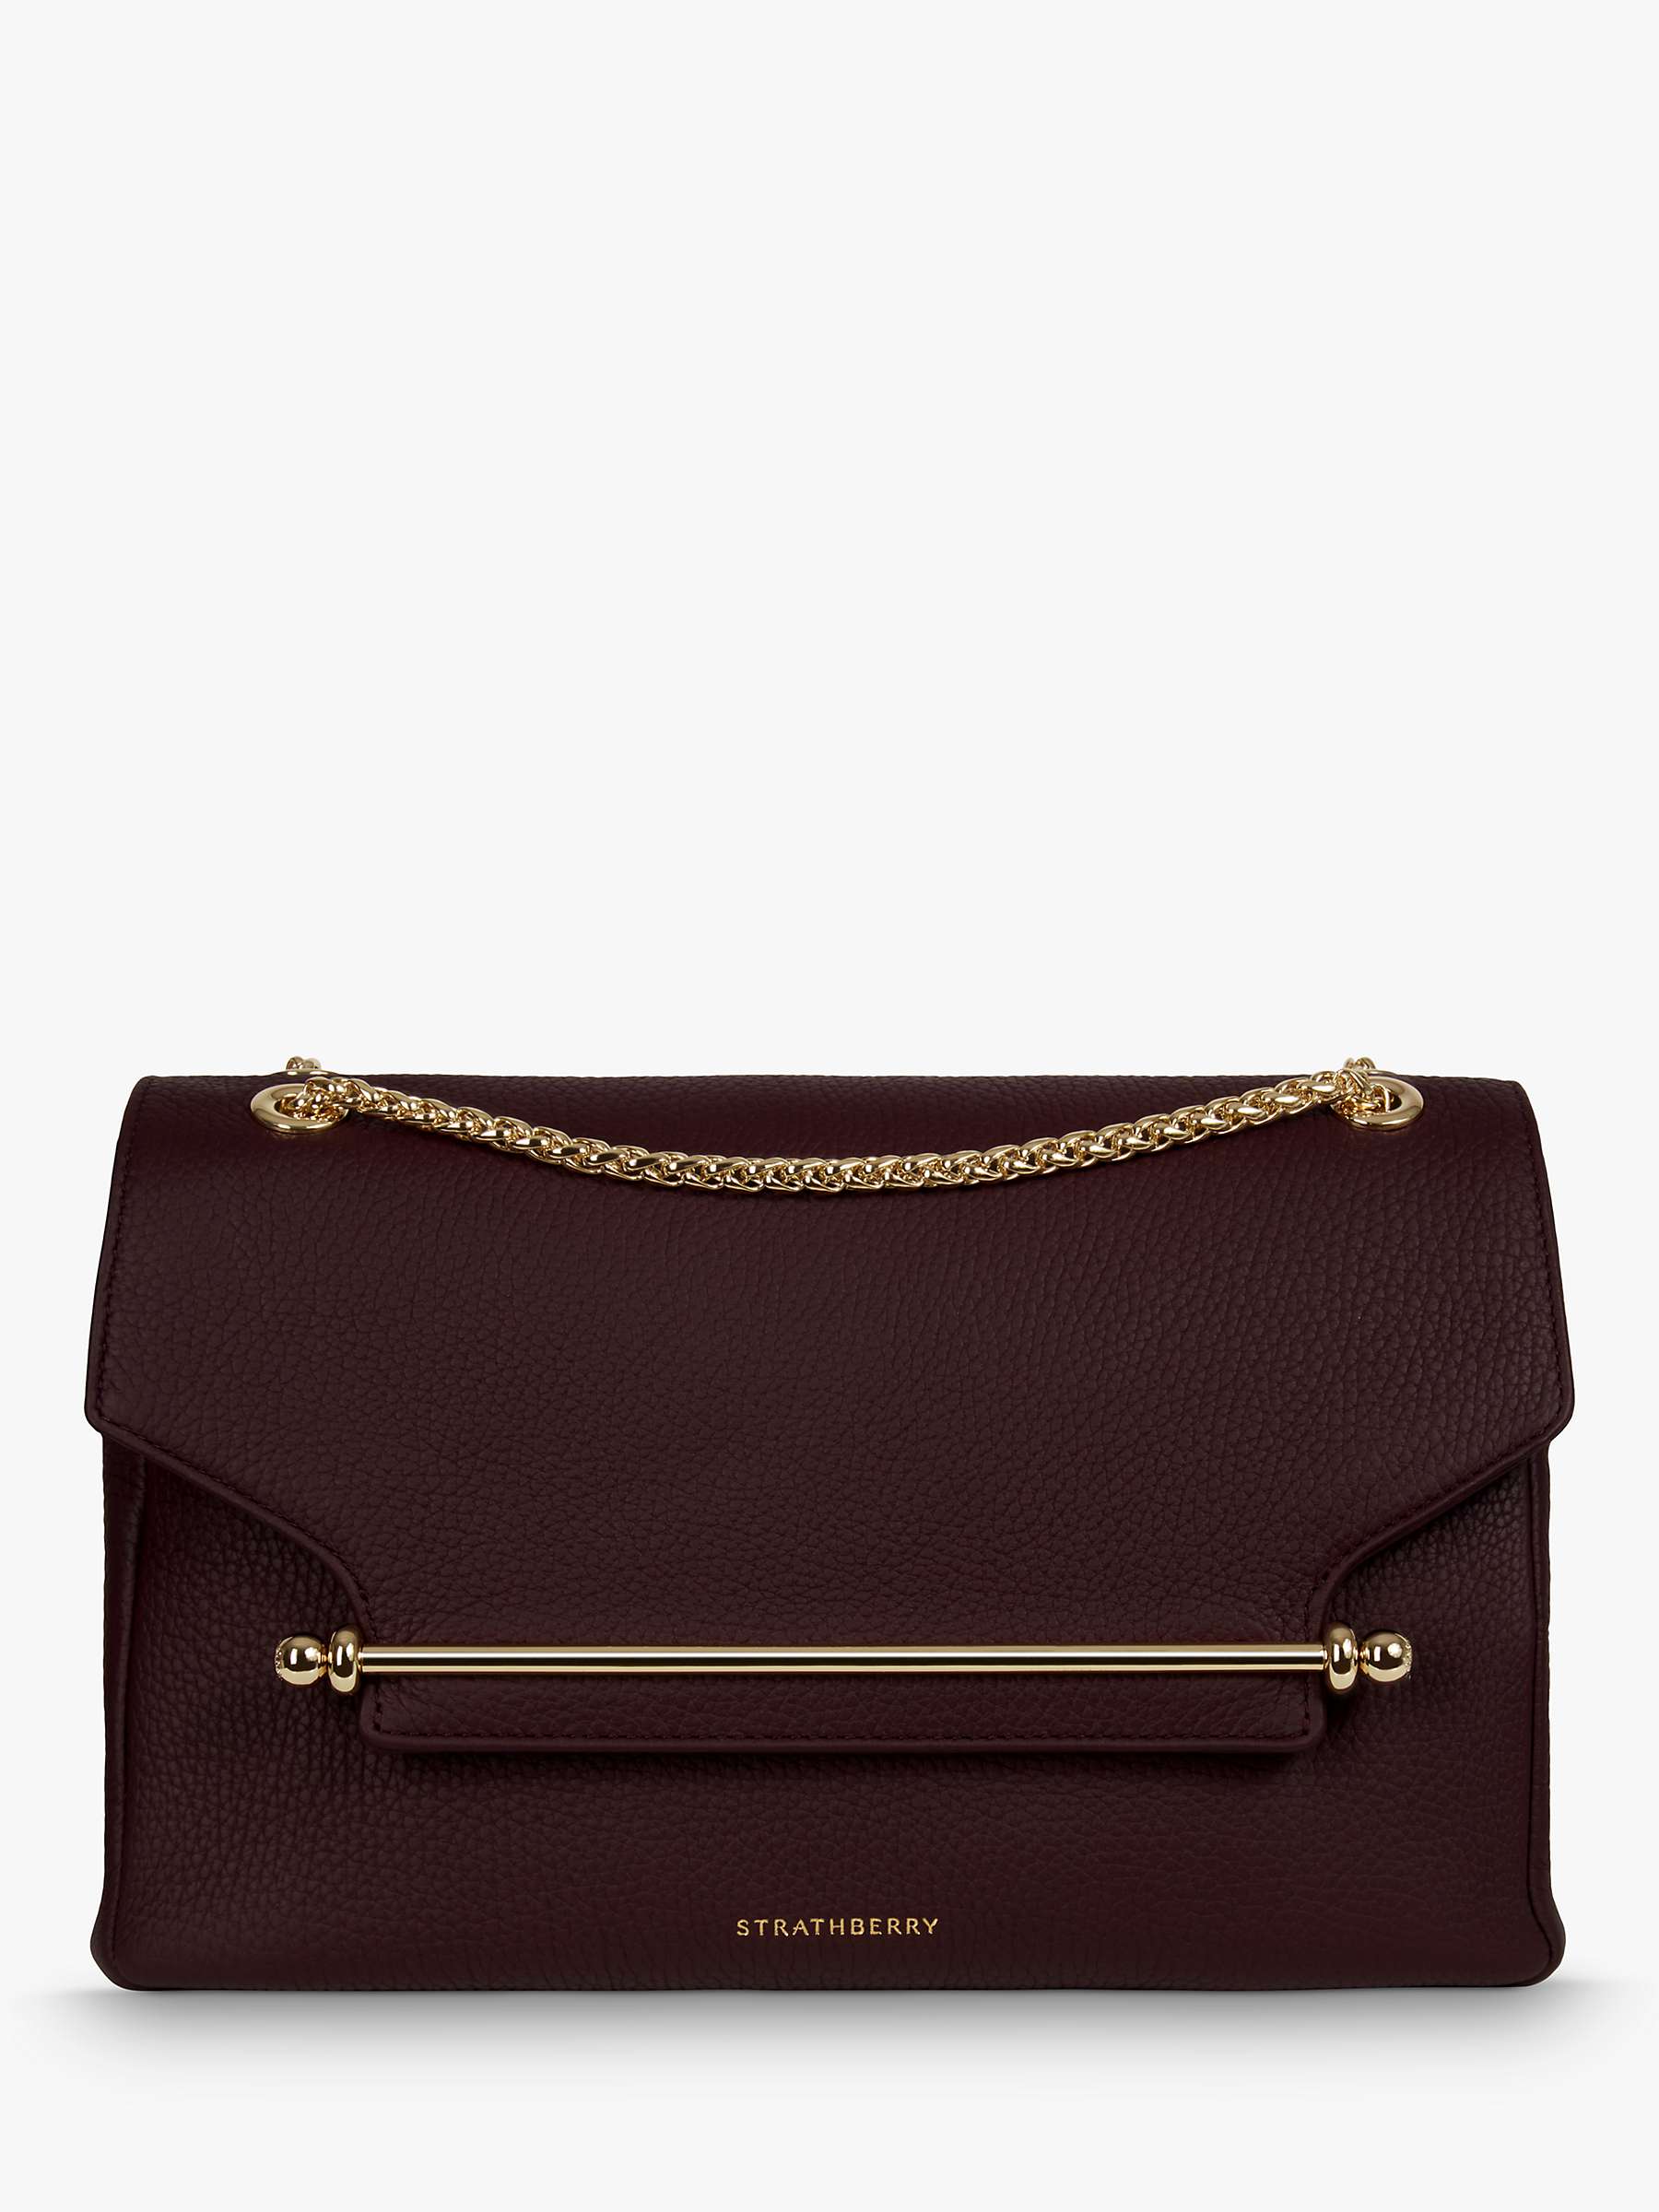 Strathberry East/West Soft Leather Chain Strap Cross Body Bag, Burgundy ...